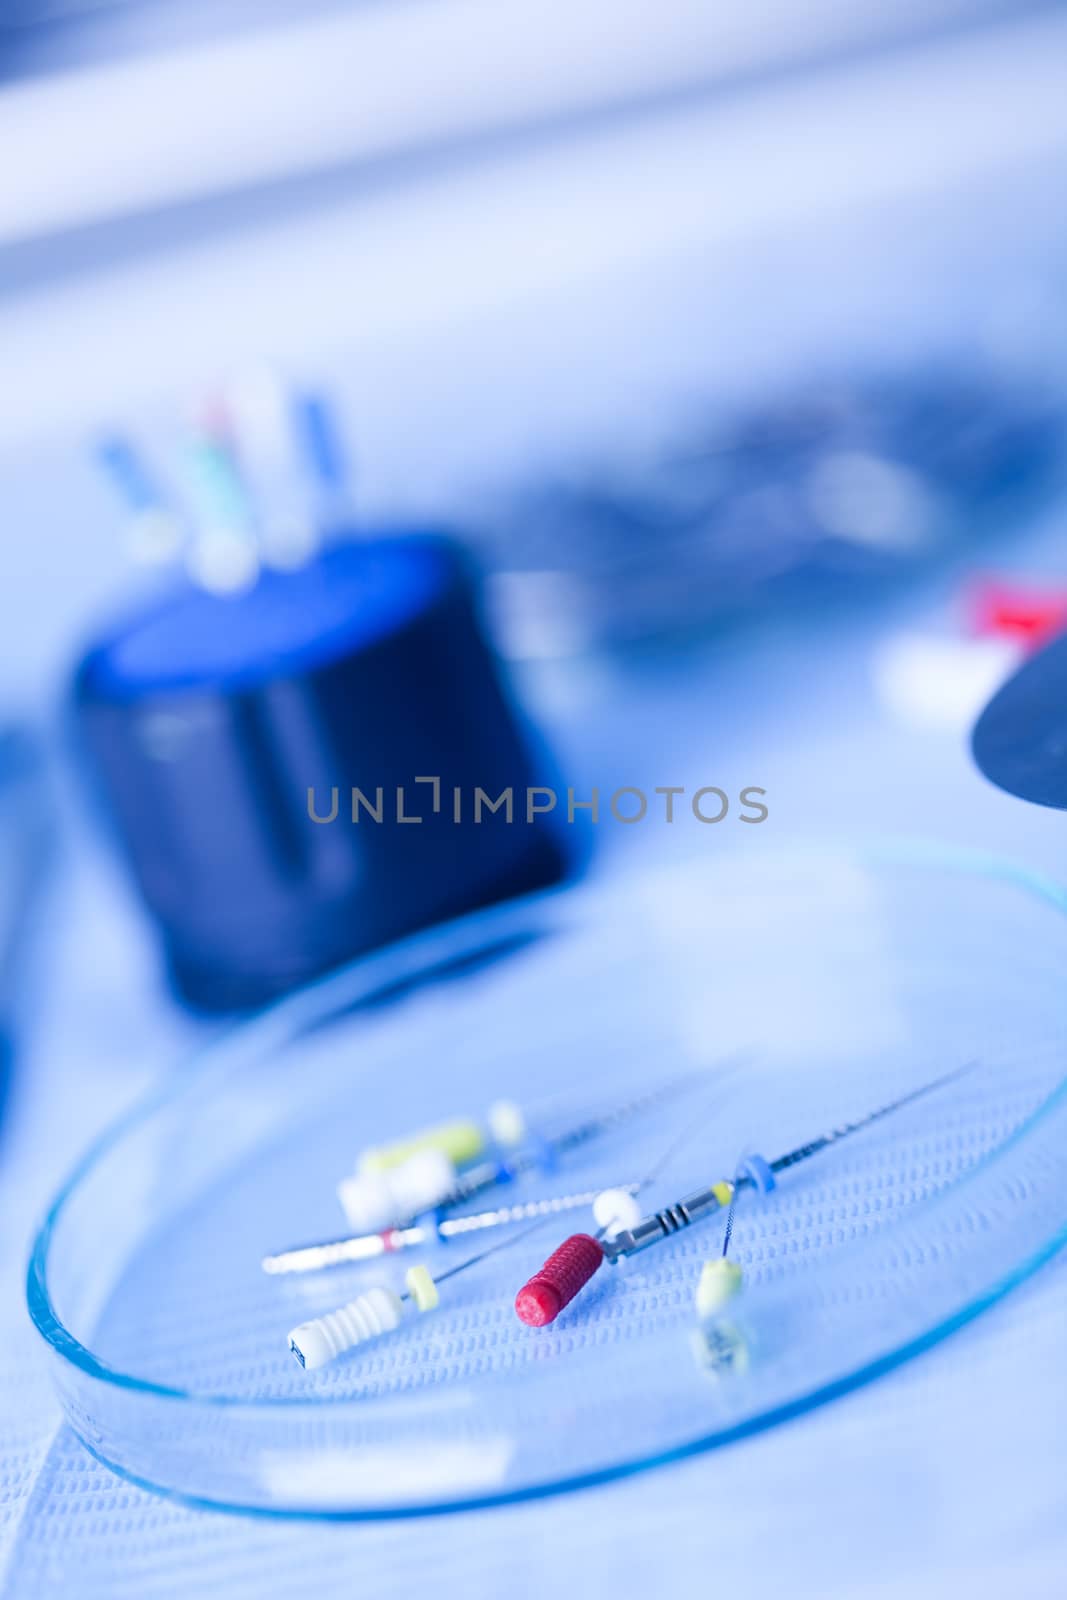 Dental tools and equipment, bright colorful tone concept by JanPietruszka